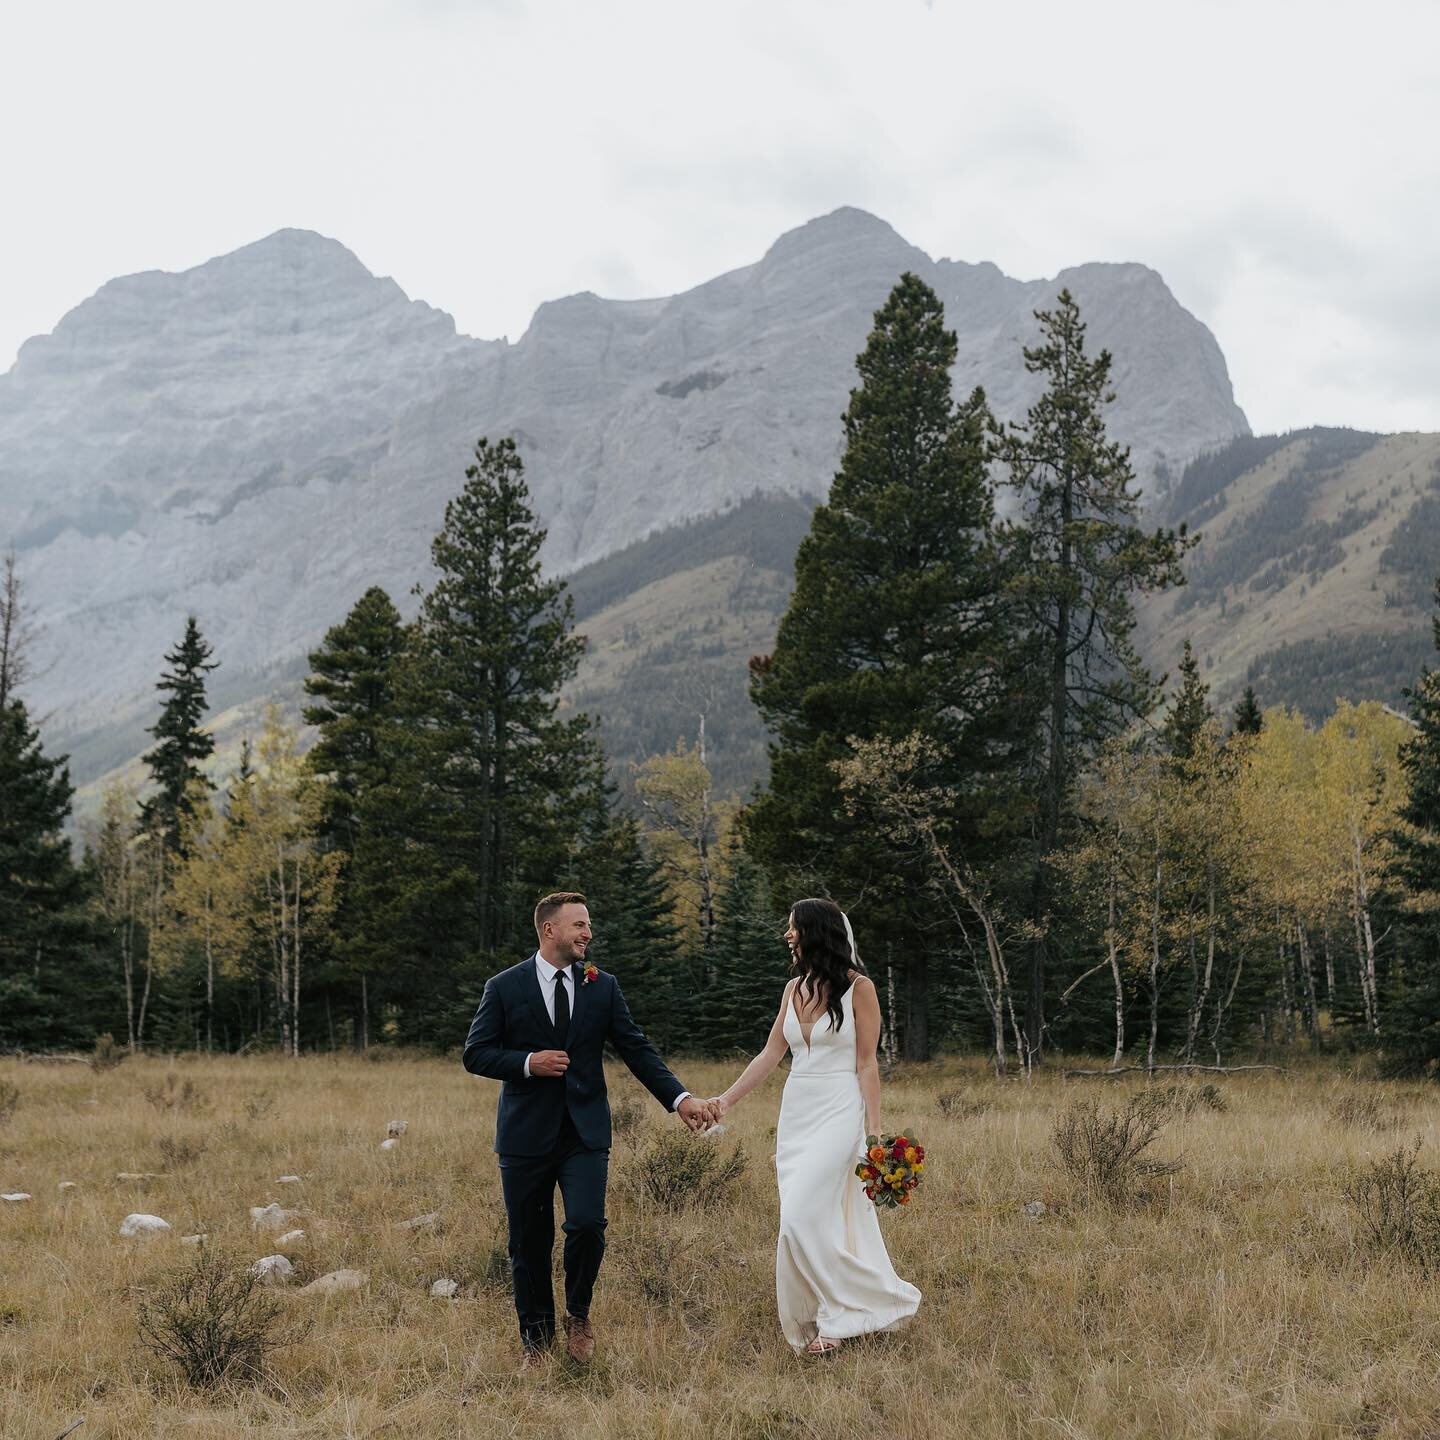 worked on this wedding all day and the views were 11/10 (couple, mountains, etc) 🤩

&mdash;

#calgaryweddingphotographer #yycweddings #yycweddingphotographer #albertaweddingphotographer #canadaweddingphotographer